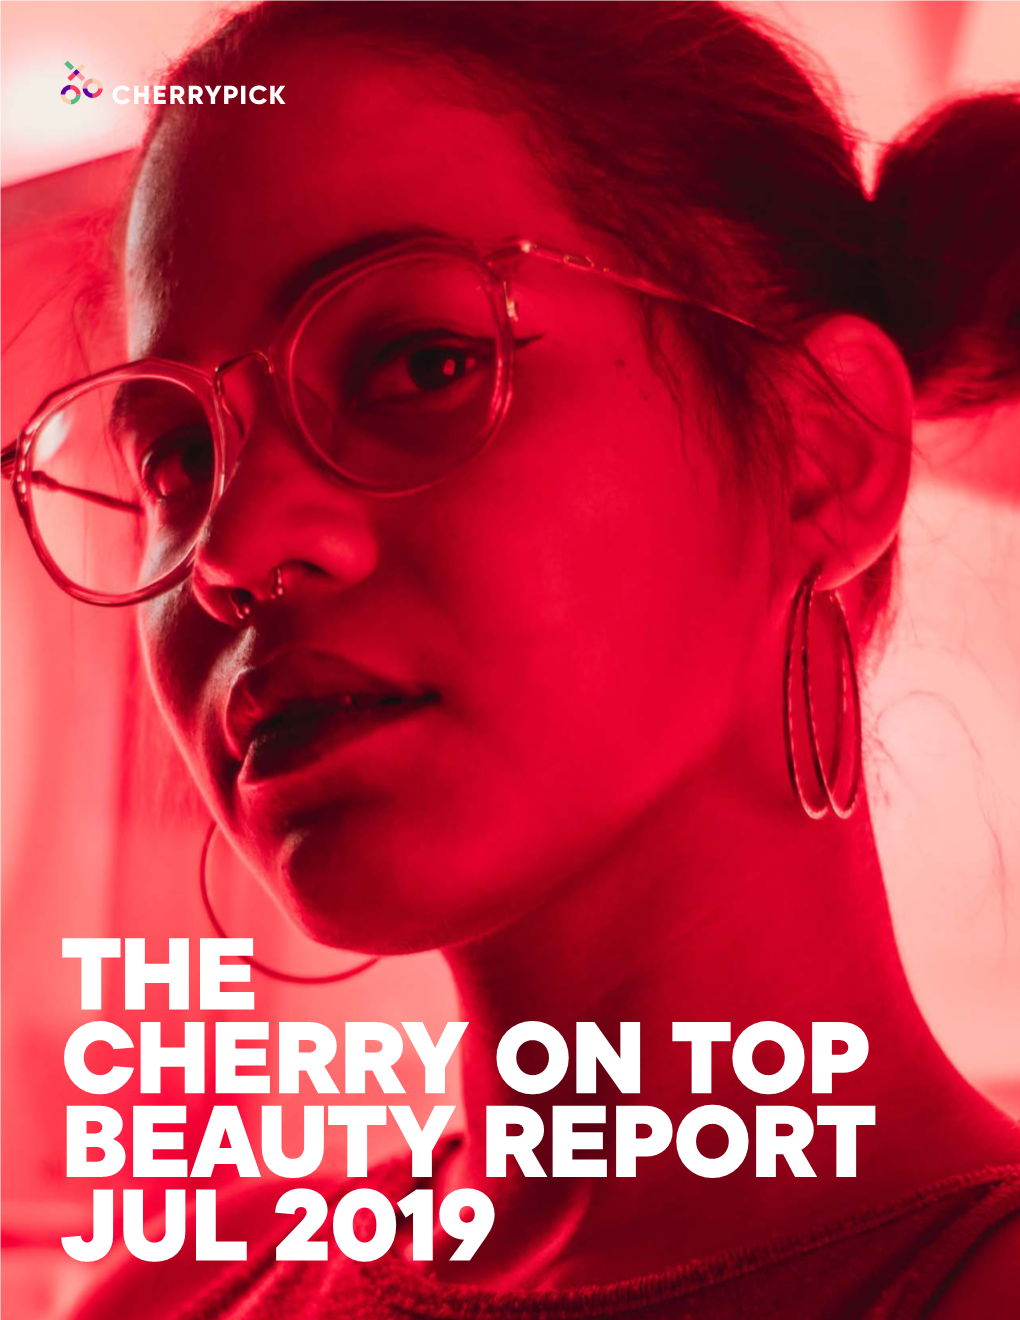 The Cherry on Top Beauty Report Jul 2019